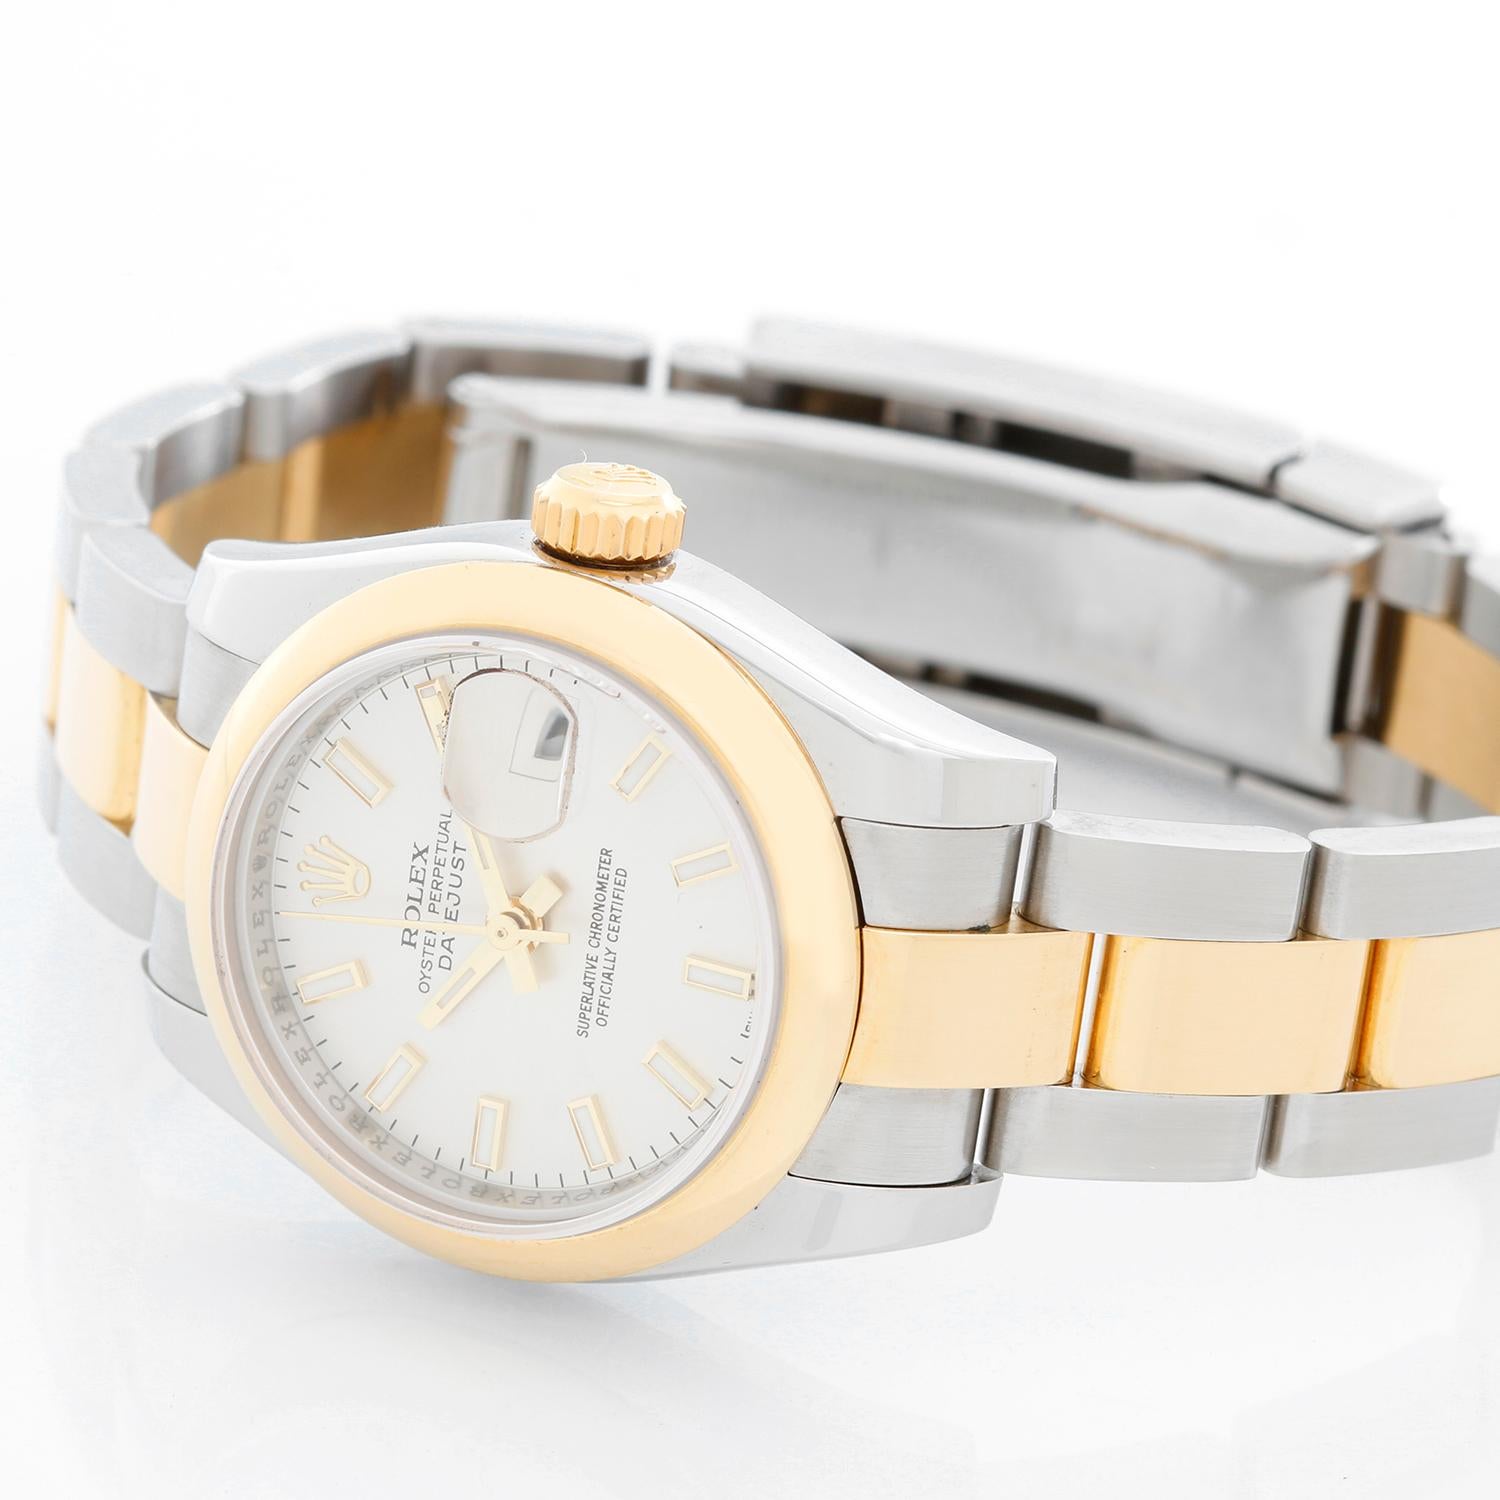 Rolex Ladies Datejust 2-Tone Stainless Steel & 18k Gold Watch 179163 -  Automatic winding. Stainless steel case with smooth 18k yellow gold bezel (26mm diameter). Silver dial with stick markers. Stainless steel and 18k yellow gold Oyster bracelet.